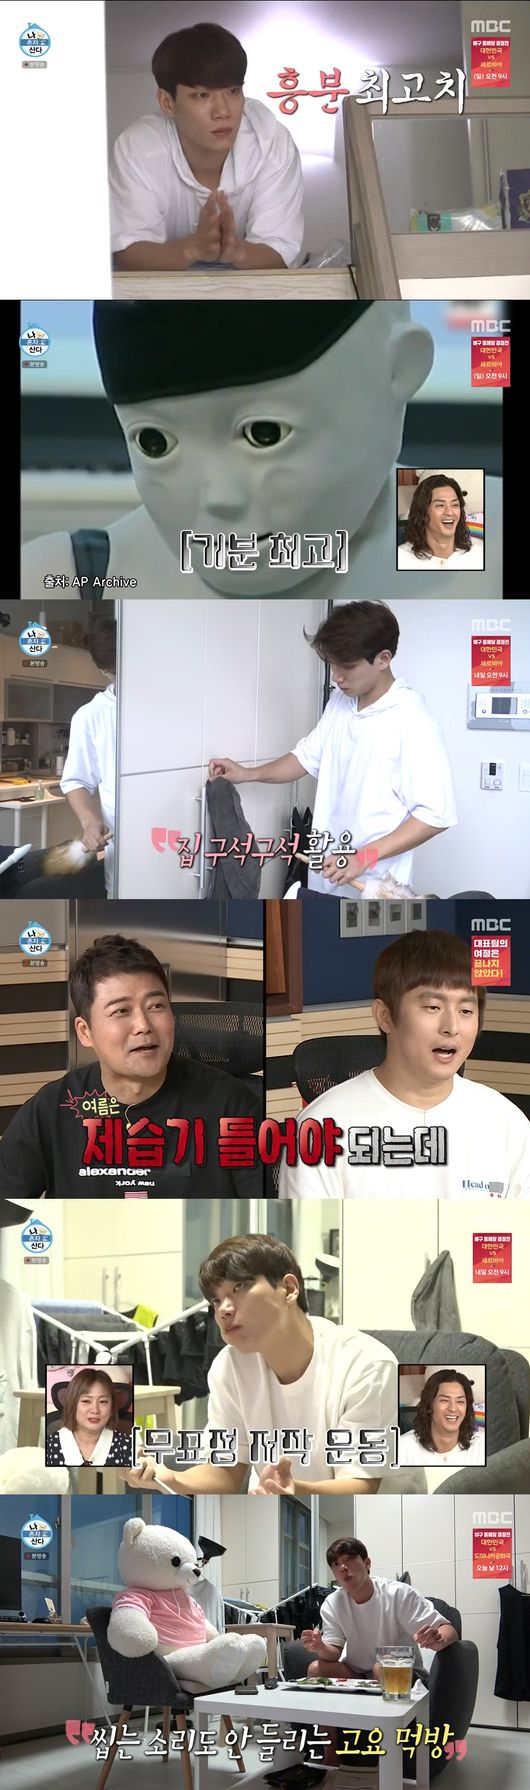 Actor Kim Gyeong-nams daily life has been revealed.MBC I Live Alone broadcast last day, the drama OK Photon in the drama Han Ye-seul is playing a hot role in the actor Kim Kyung-nams daily life was revealed.Kim Kyung-nam visited a Korean buffet for lunch. My friend introduced me for the first time, but the caustic rain was good.Kim Kyung-nam enjoyed eating rice with wild bibimbap and chicken. Kim Kyung-nam said, I wanted to eat it comfortably because it was a holiday for a long time.I ate rice quickly and ate it slower than usual. Kim went to the bedding store to buy Summer bedding, which was surprised to hear that Summer bedding was worth 140,000 One.I was really surprised. I first bought bedding. I thought it was 50,000 One for expensive. I dont seem to know the worlds best, Kim said.Kim Kyung-nam began to pick his bedding meticulously and carefully; Kim Ji-hoon praised him as a huge housekeeper.Kim Kyung-nam first picked a cheap bedding and eventually chose the expensive bedding he liked at first.As soon as Kim came home, he changed his baro beding, which he also arranged for electric plates that he could not remove from one Summer and replaced his bedding with a new beding.Kim Kyung-nam started cleaning up. Kian84, who saw it, said, Its not so much to say, but its dry.After cleaning, Kim started practicing the Baro drama OK Photon script, which surprised him by showing his Baro tears as he read the script.Kim Kyung-nam said, It seems that the emotions are piled up in the second half of the work. Kian84 laughed, saying, I thought I was a person without feelings.Kim started to clean up the laundry after the script practice. Kim Kyung-nam started to hang the laundry in the corner of the house when he lacked the laundry hanger.Is it humidified and bad for Summer, said Kian84, making the surroundings a laughing sea, so Park Na-rae said, When you put a humidifier on Summer, you grow mushrooms.Kim Kyung-nam was washing laundry, but he started baking meat for dinner and laughed. Kim Kyung-nam ate at home but put food on the plate.I put a little bit of food in it, so it was easy to wash dishes. Kim Kyung-nam enjoyed a meal with a beer.After finishing the meal and washing dishes, I started the chin hanger installed on the door frame and made the surroundings surprised.Kim Ji-hoon said, I really like it when I install it like that at home. He suggested, Lets meet later and we will do it together.Kim Kyung-nam began writing a diary after finishing Haru. Kim Kyung-nam said, I wrote a handbook in the army and I have been writing it since then. I have been writing it almost every day for 13 years.Kim Kyung-nam said, I wrote a diary and always signed it. I thought it would be good if it worked out.Kim Kyung-nam read Harus diary and showed tears. Kim Kyung-nam said, Ive been really busy these days, and I think I have a lot to miss.Kim Kyung-nam laughed at his daily life by saying, I am dry because I have no words.MBC I Live Alone broadcast capture